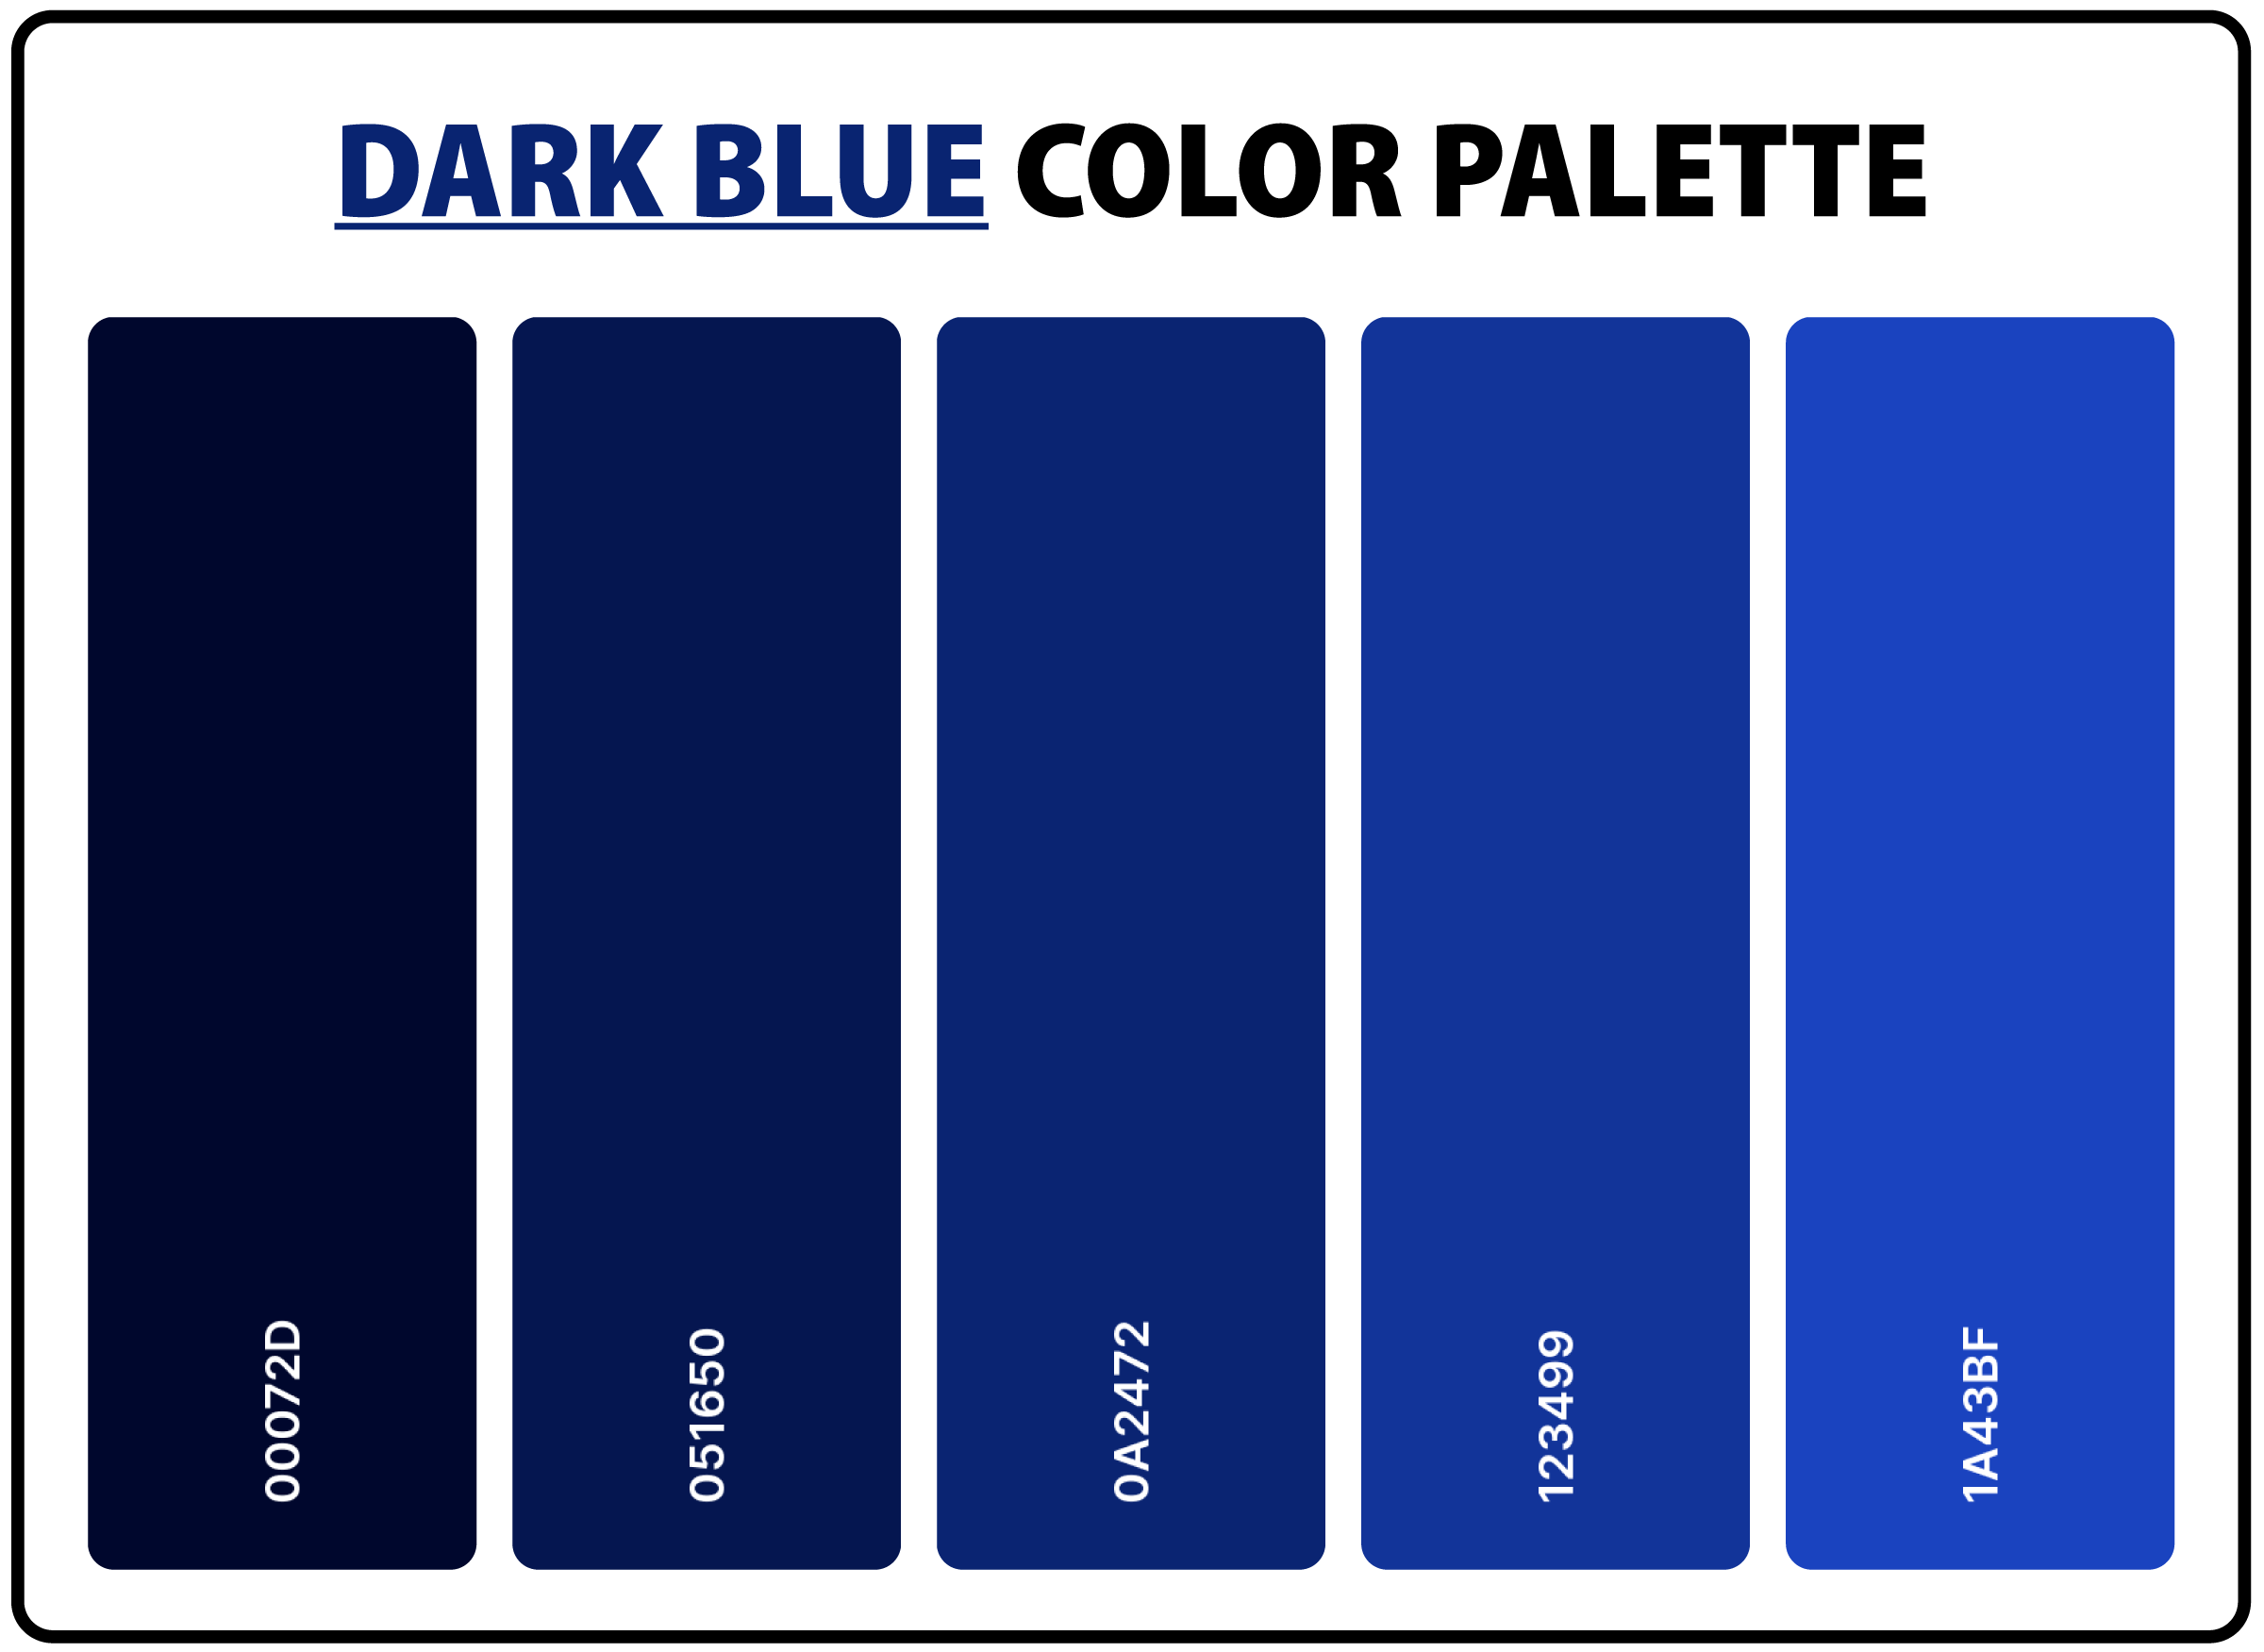 Dark-Blue-Color-Palette-with-Hex-Codes